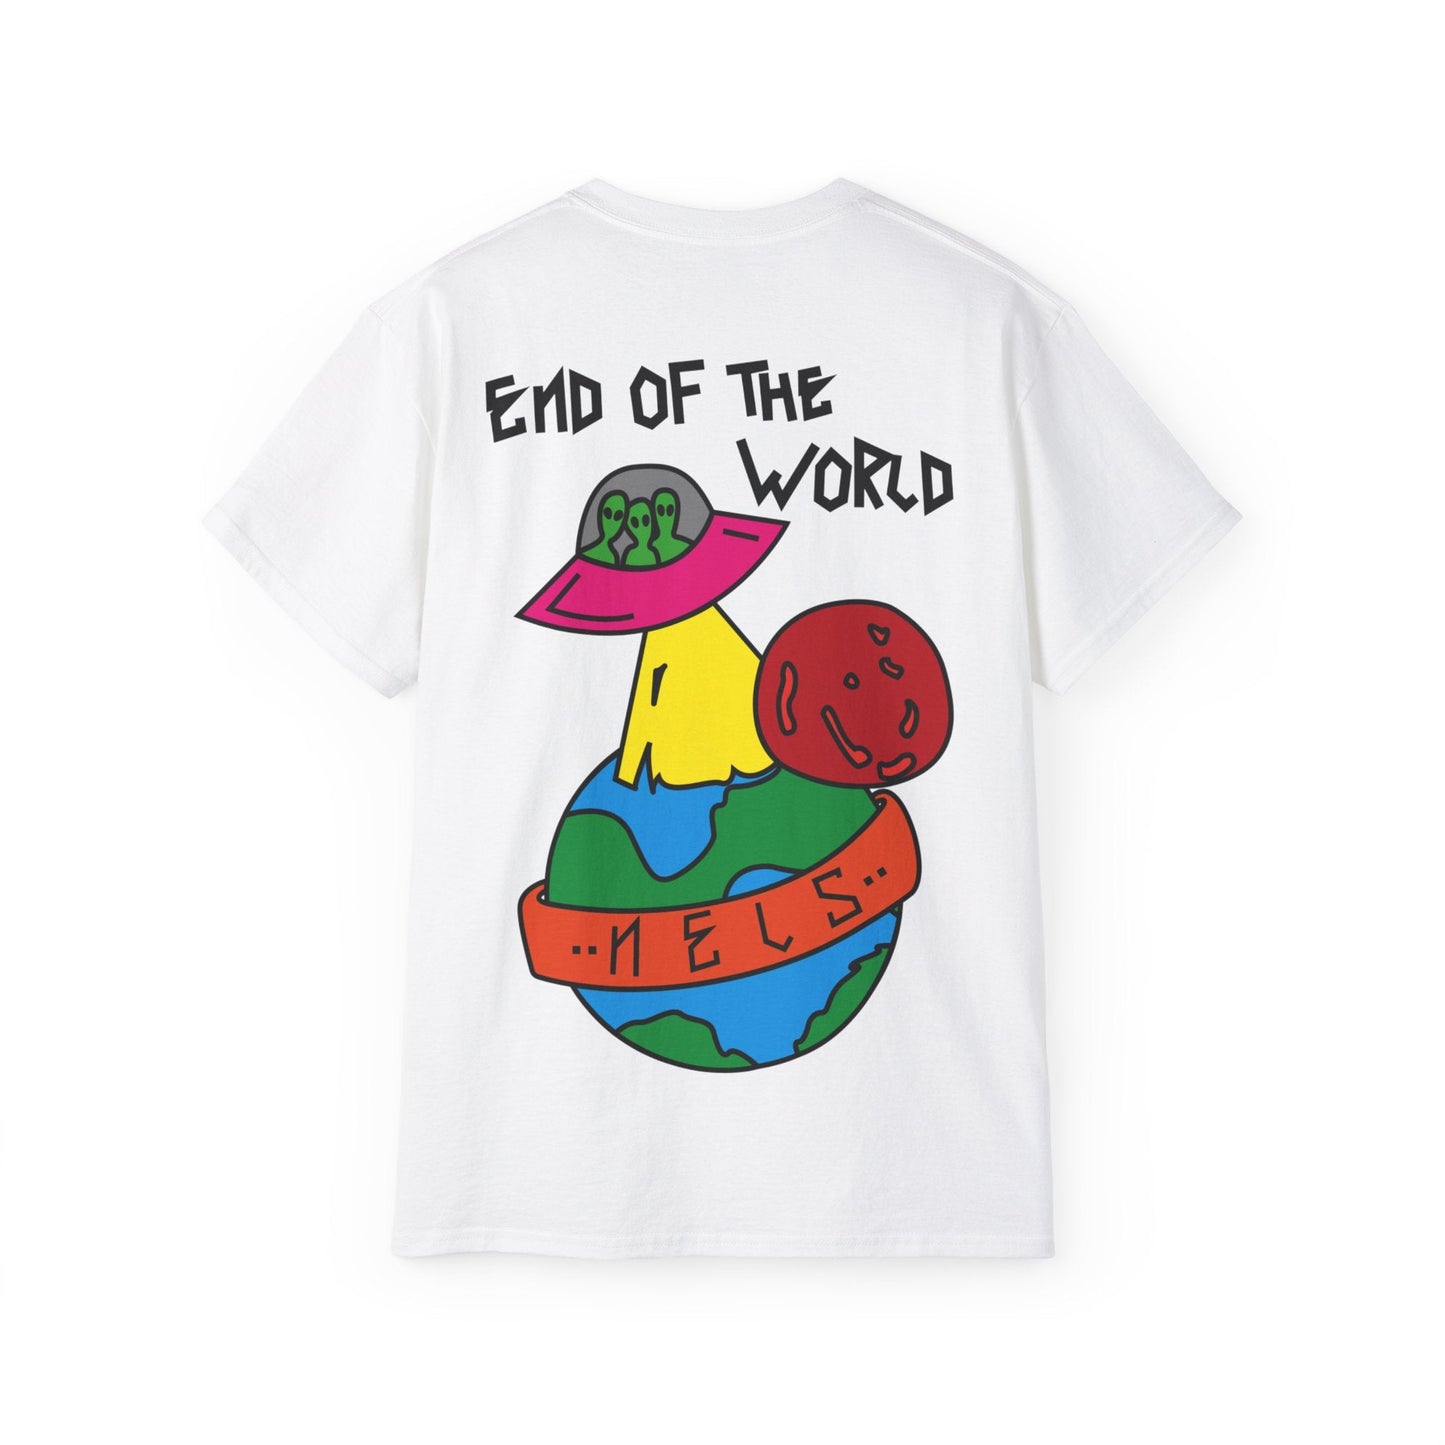 Tee NELS. END OF THE WORLD Front and Back - NELS.